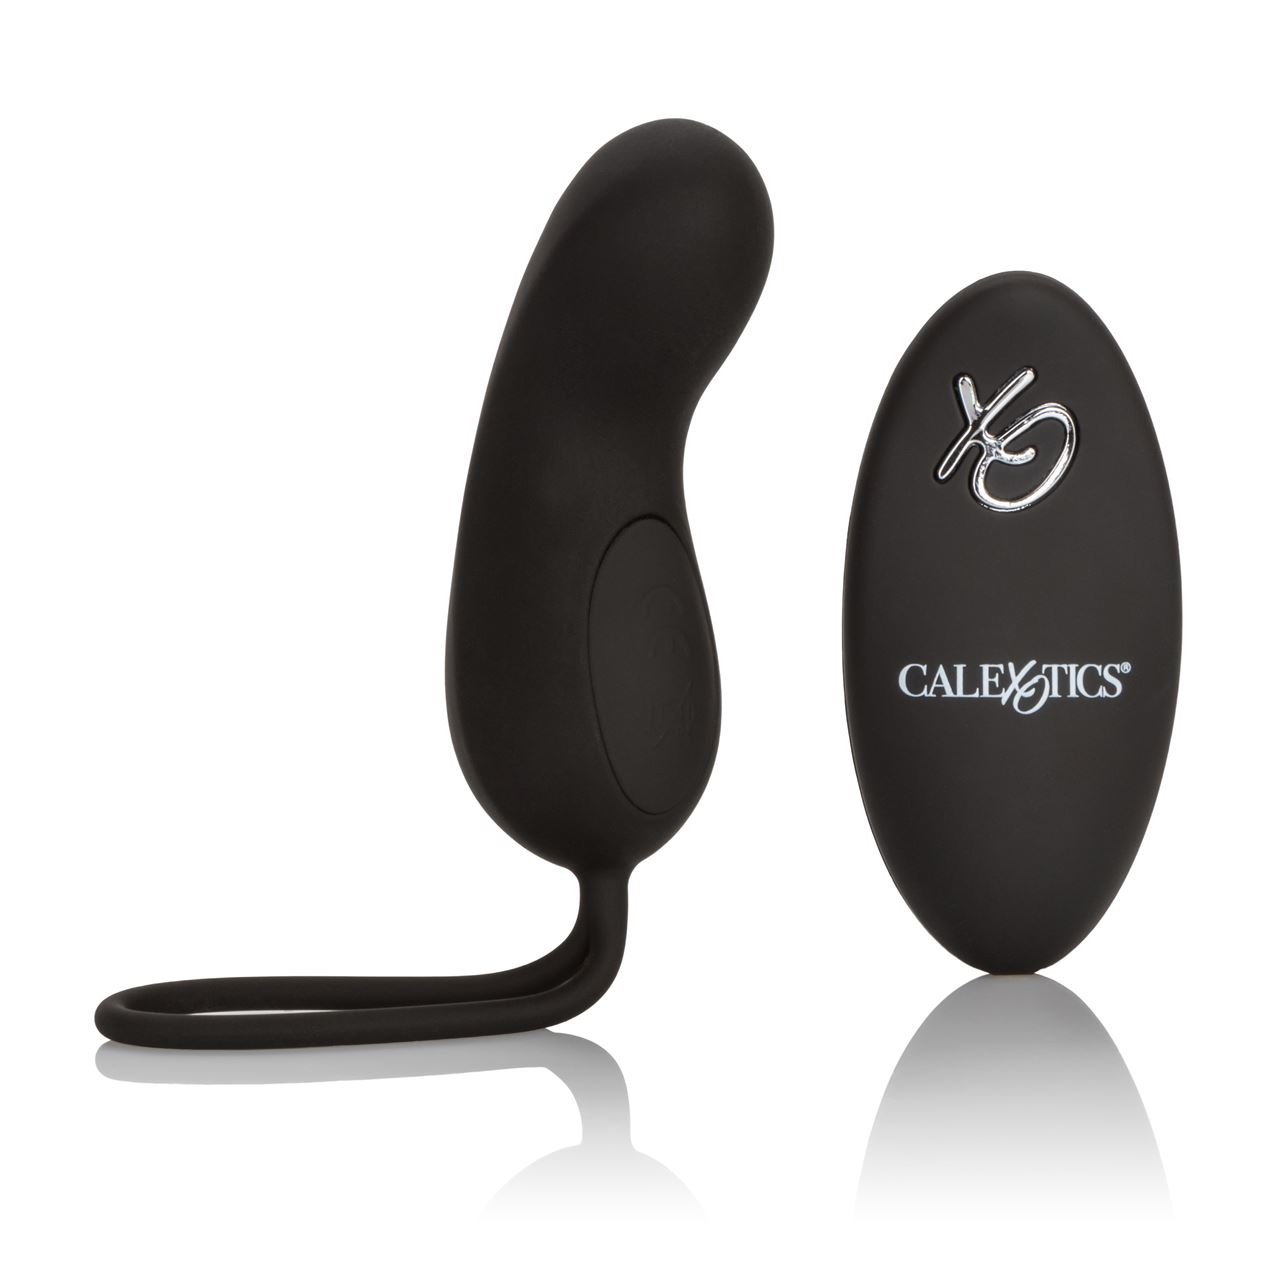 0014080_silicone-remote-rechargeable-curve_xnezrbg2e65qlfzb.jpeg